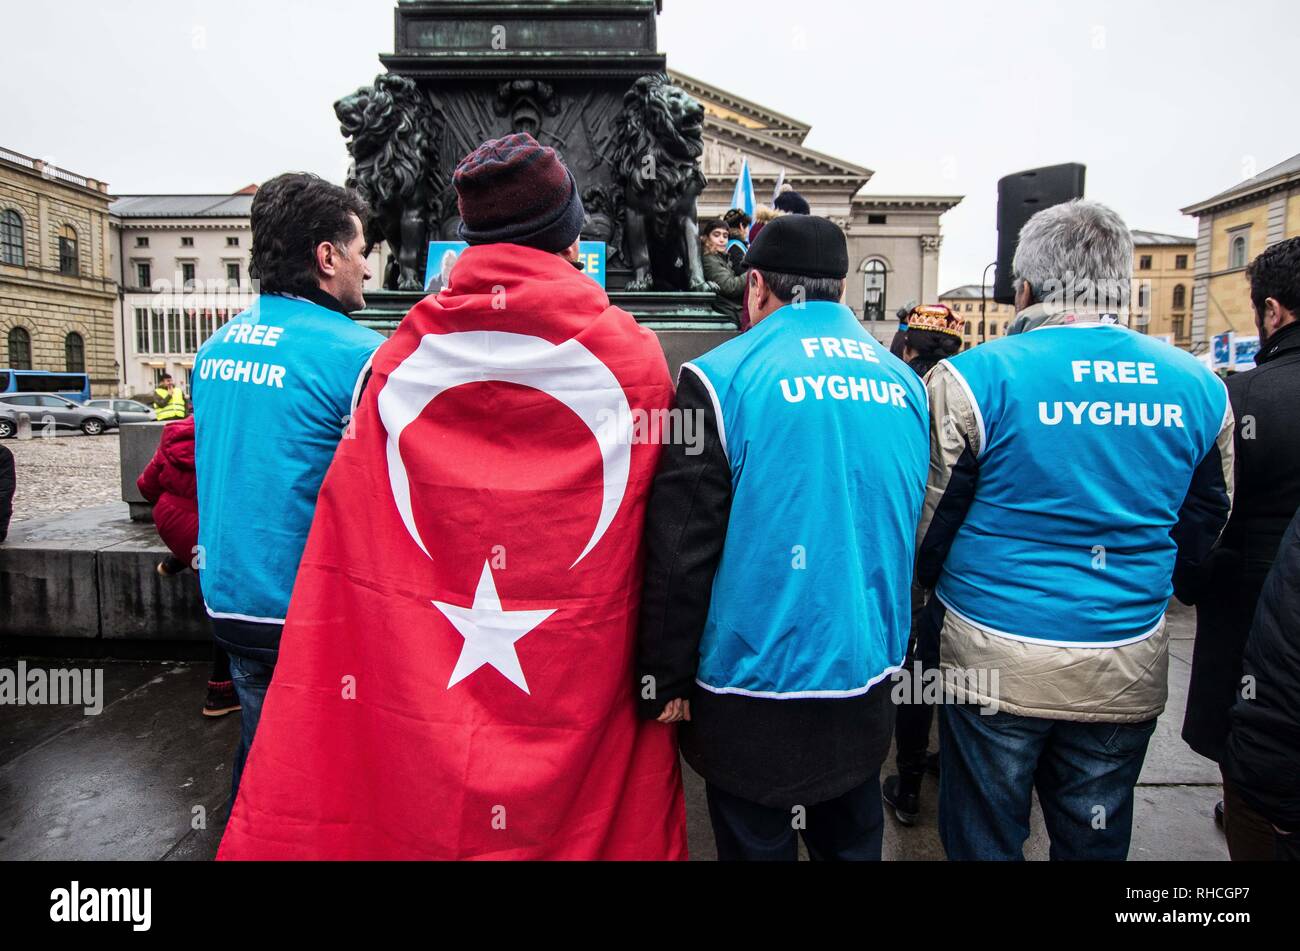 Munich, Bavaria, Germany. 2nd Feb, 2019. to protest against the so-called 'Muslim Crackdown'' by the Chinese Communist Party in the Xinjiang Autonomous Region of China. The region is contains roughly 26 million people, 11 million of whom are the ethnically Turkic Uyghurs who still call the region East Turkistan . The CCP has placed upwards of 1 million Uyghurs in reeducation camps, as well as performing widespread surveillance of the non-Han residents. There are many reports of psychological and physic Credit: ZUM Credit: ZUMA Press, Inc./Alamy Live News Stock Photo